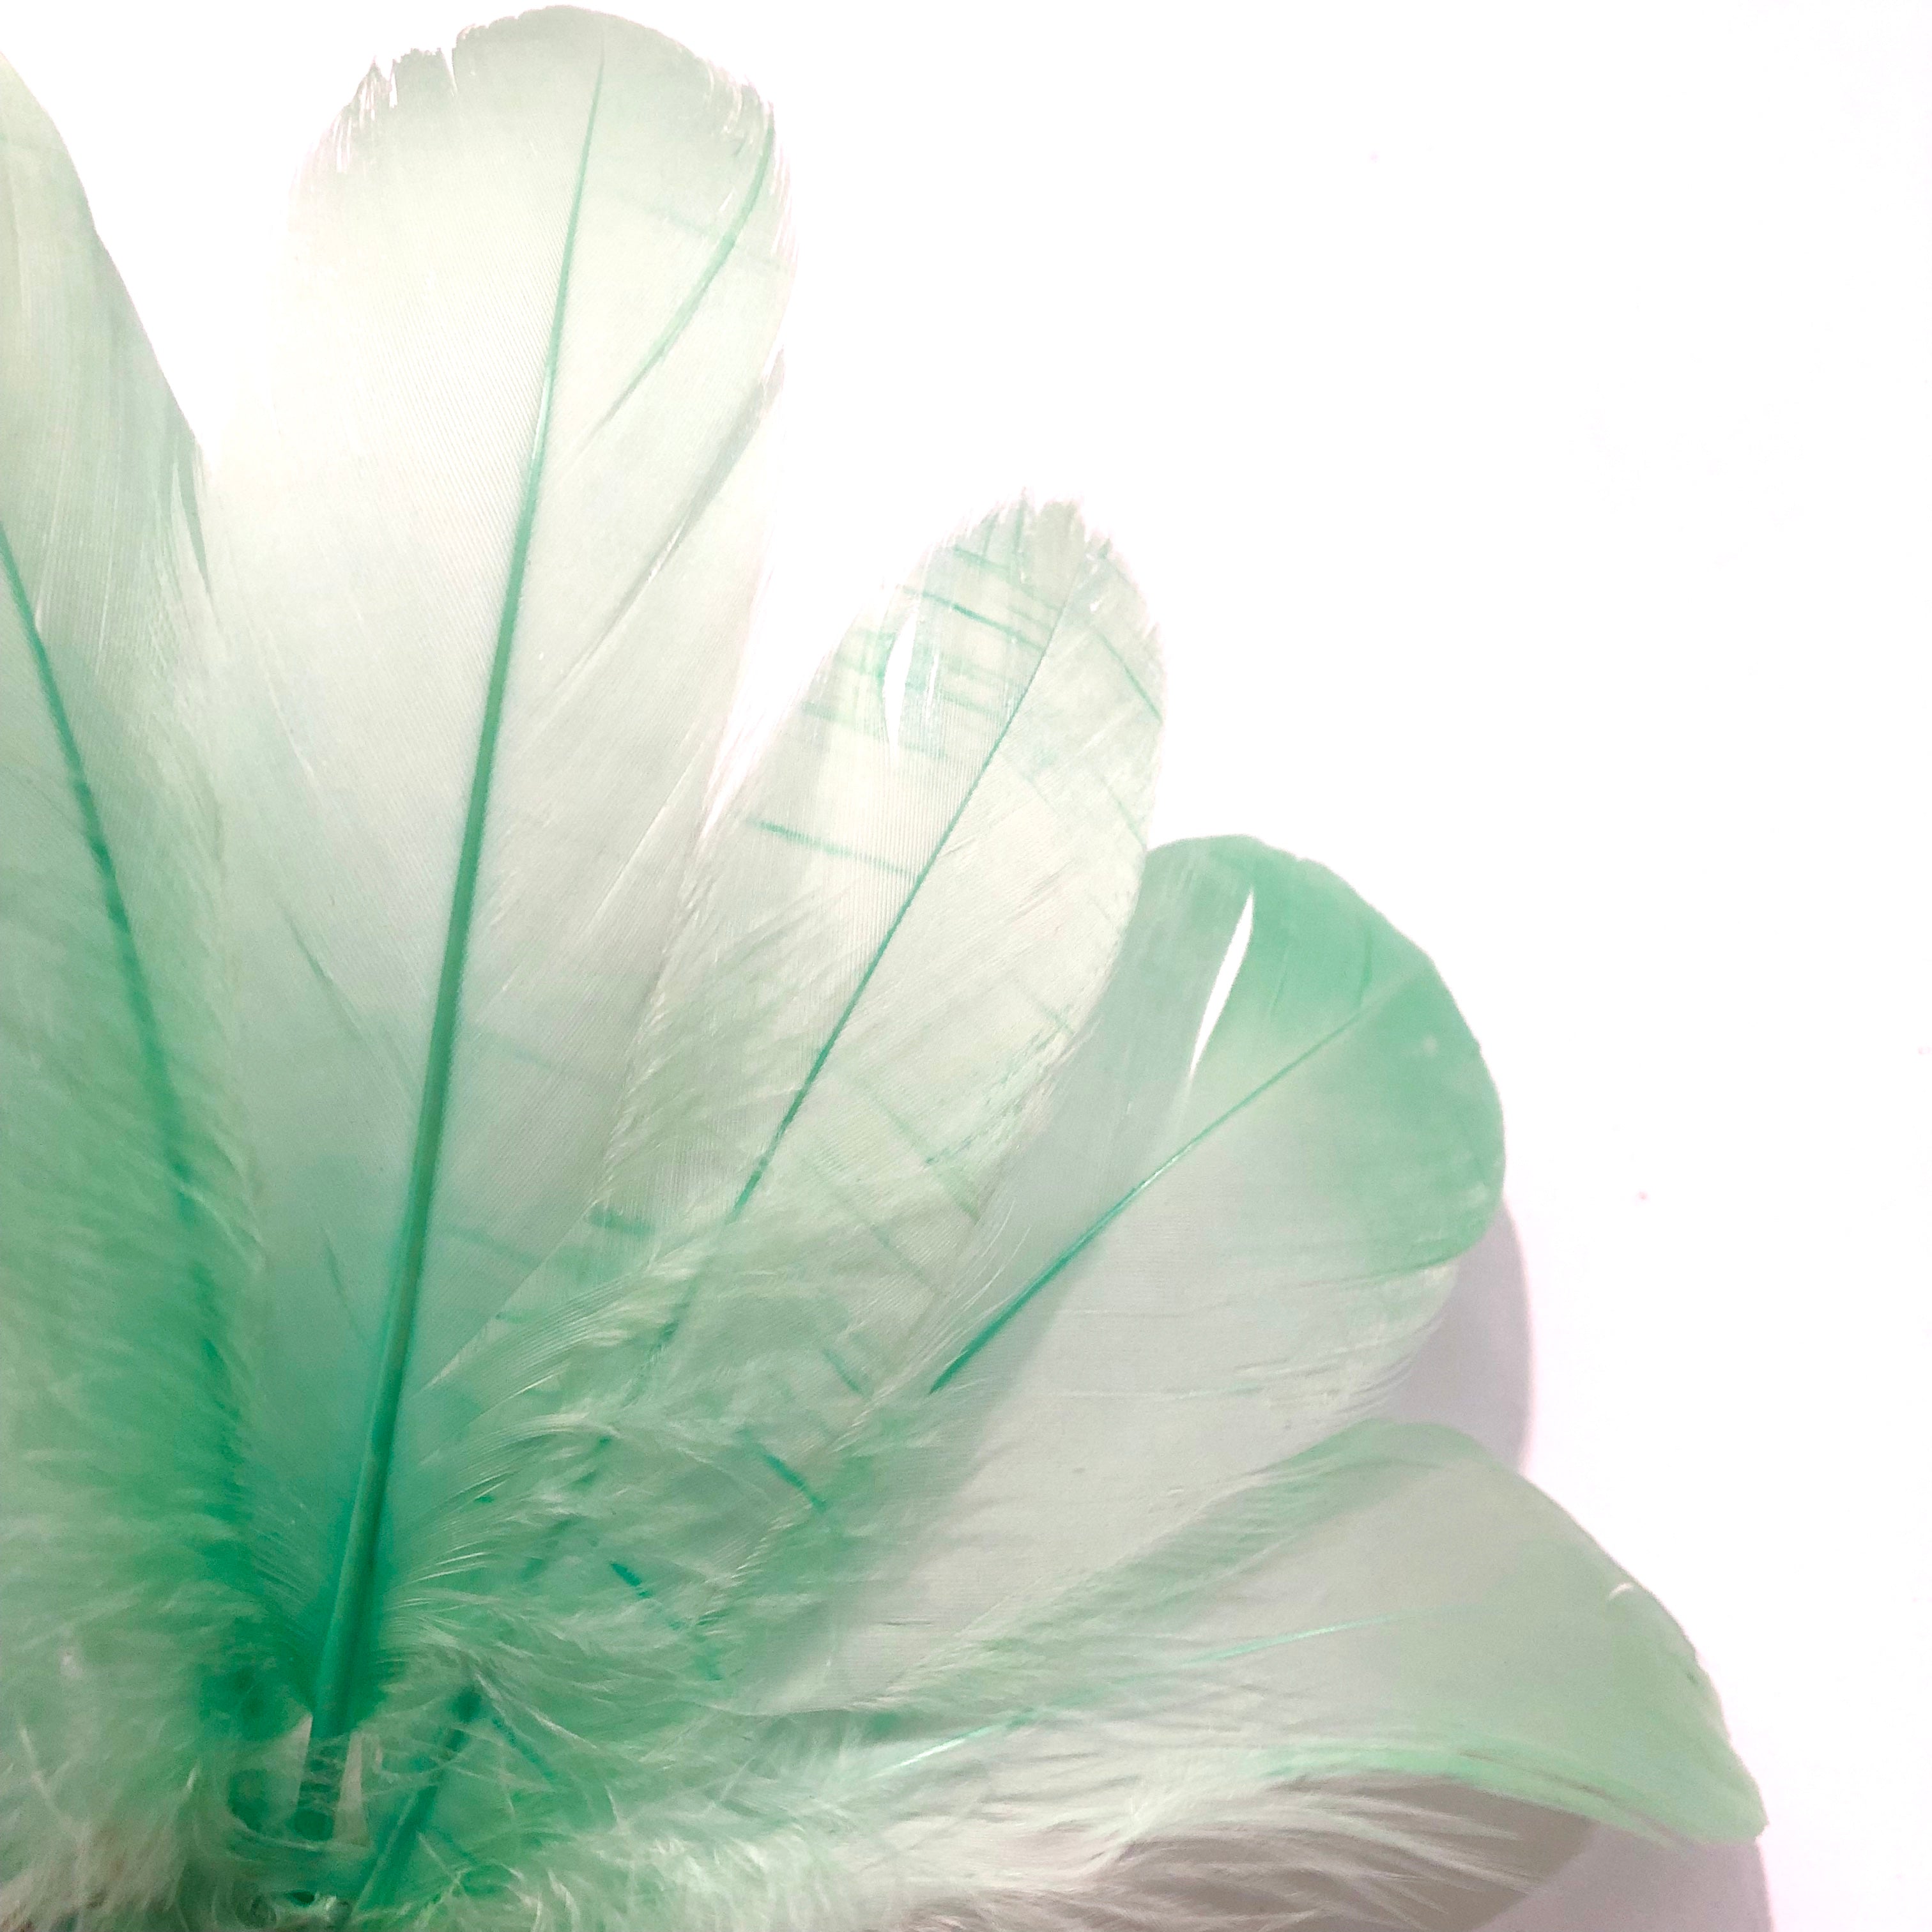 Goose Nagoire Feathers 10 grams - Mint Green